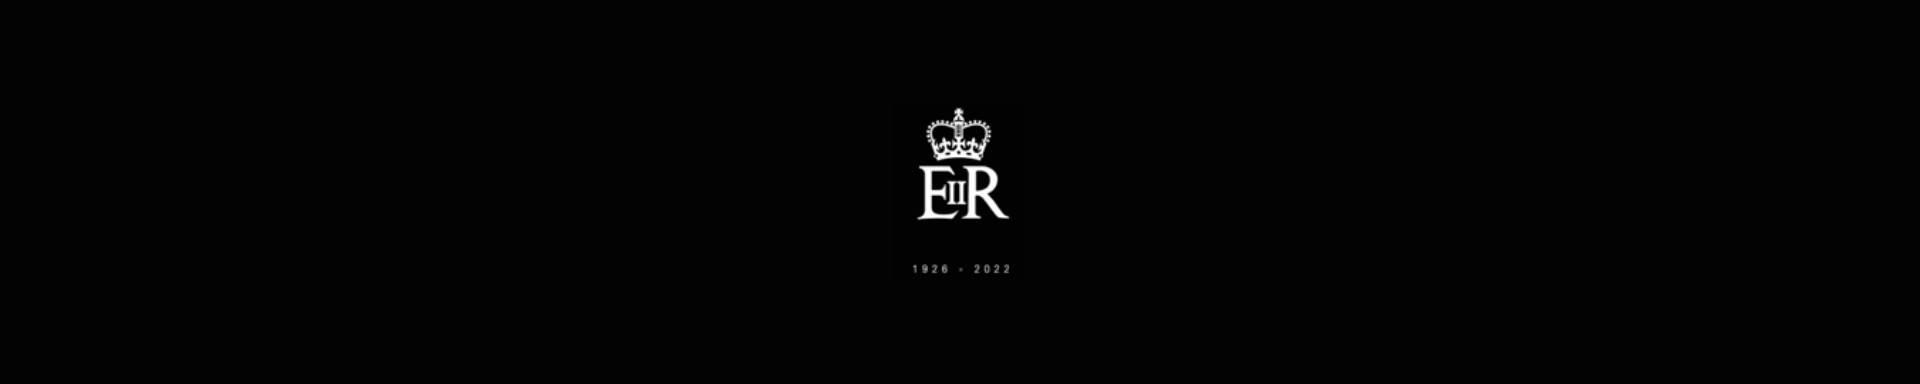 Black background with the initials of Queen Elizabeth II in the center